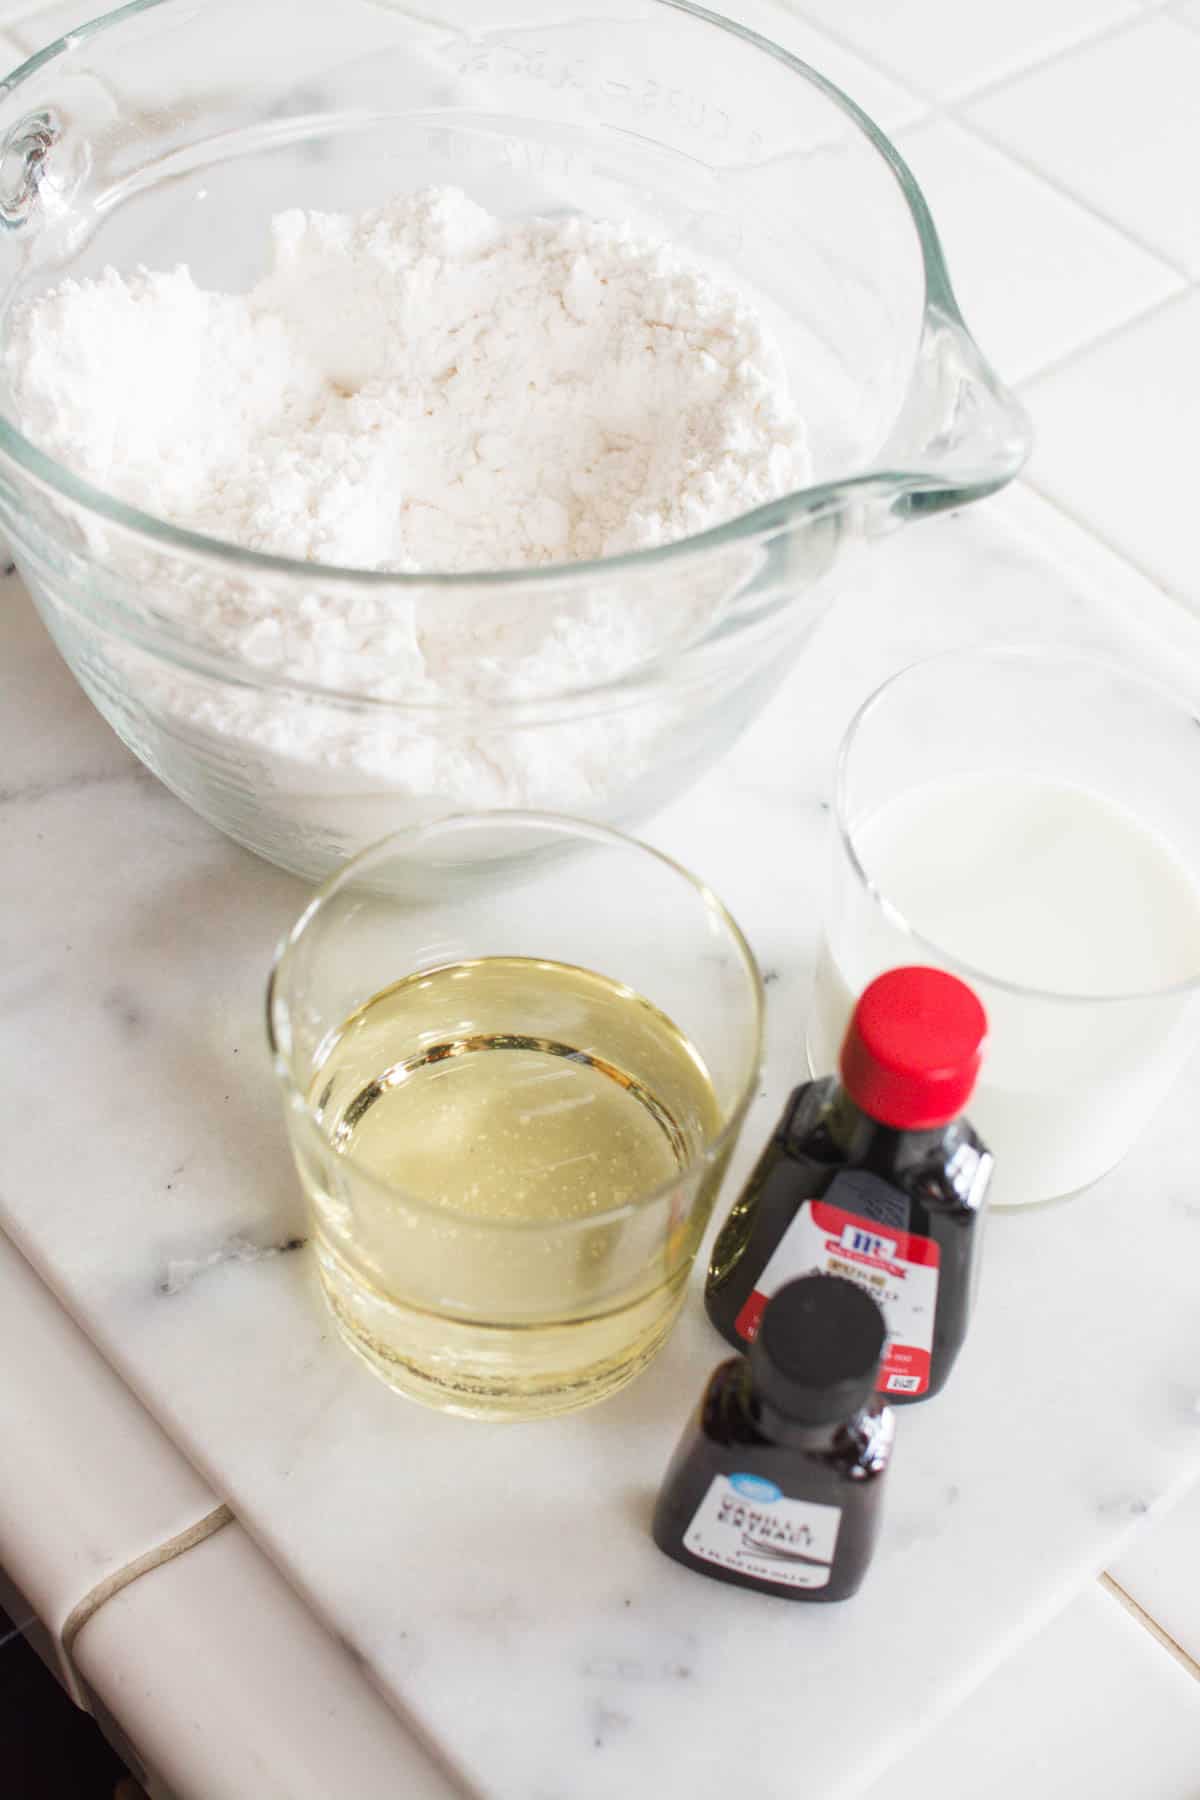 Dry cake mix in a glass bowl next to vanilla, oil and almond oil on a counter.